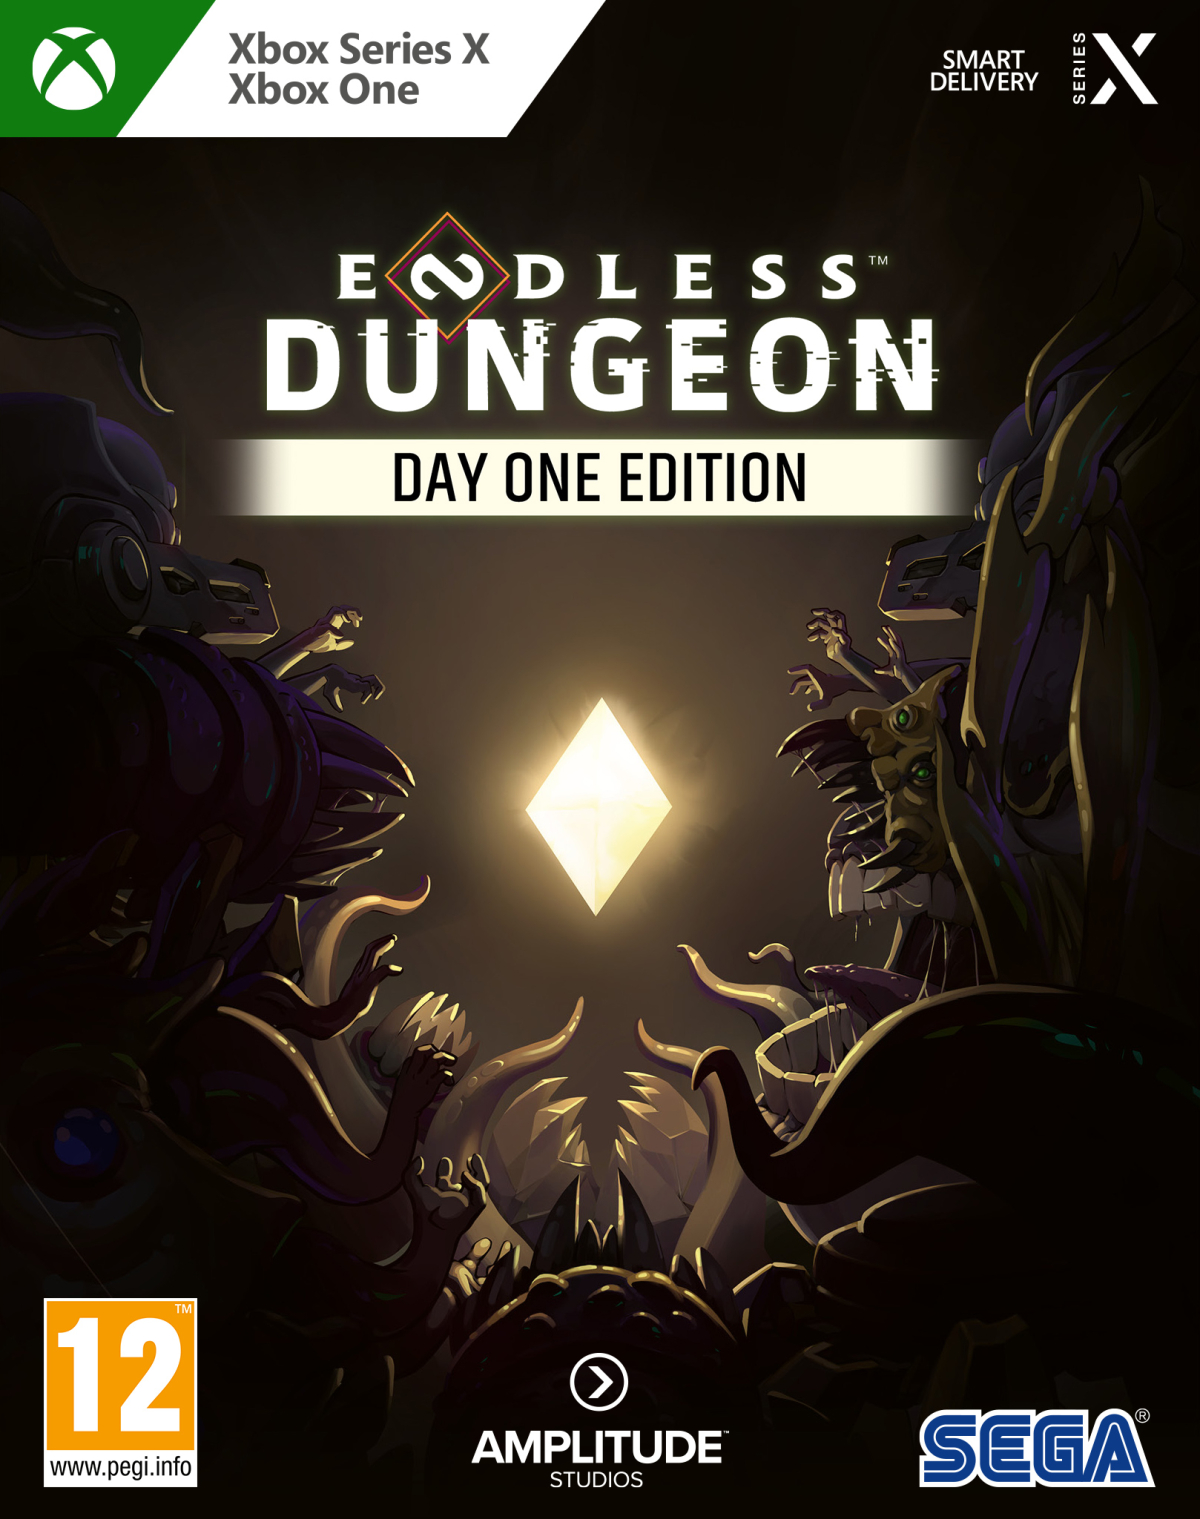 XBOXOne/SeriesX Endless Dungeon Day One Edition